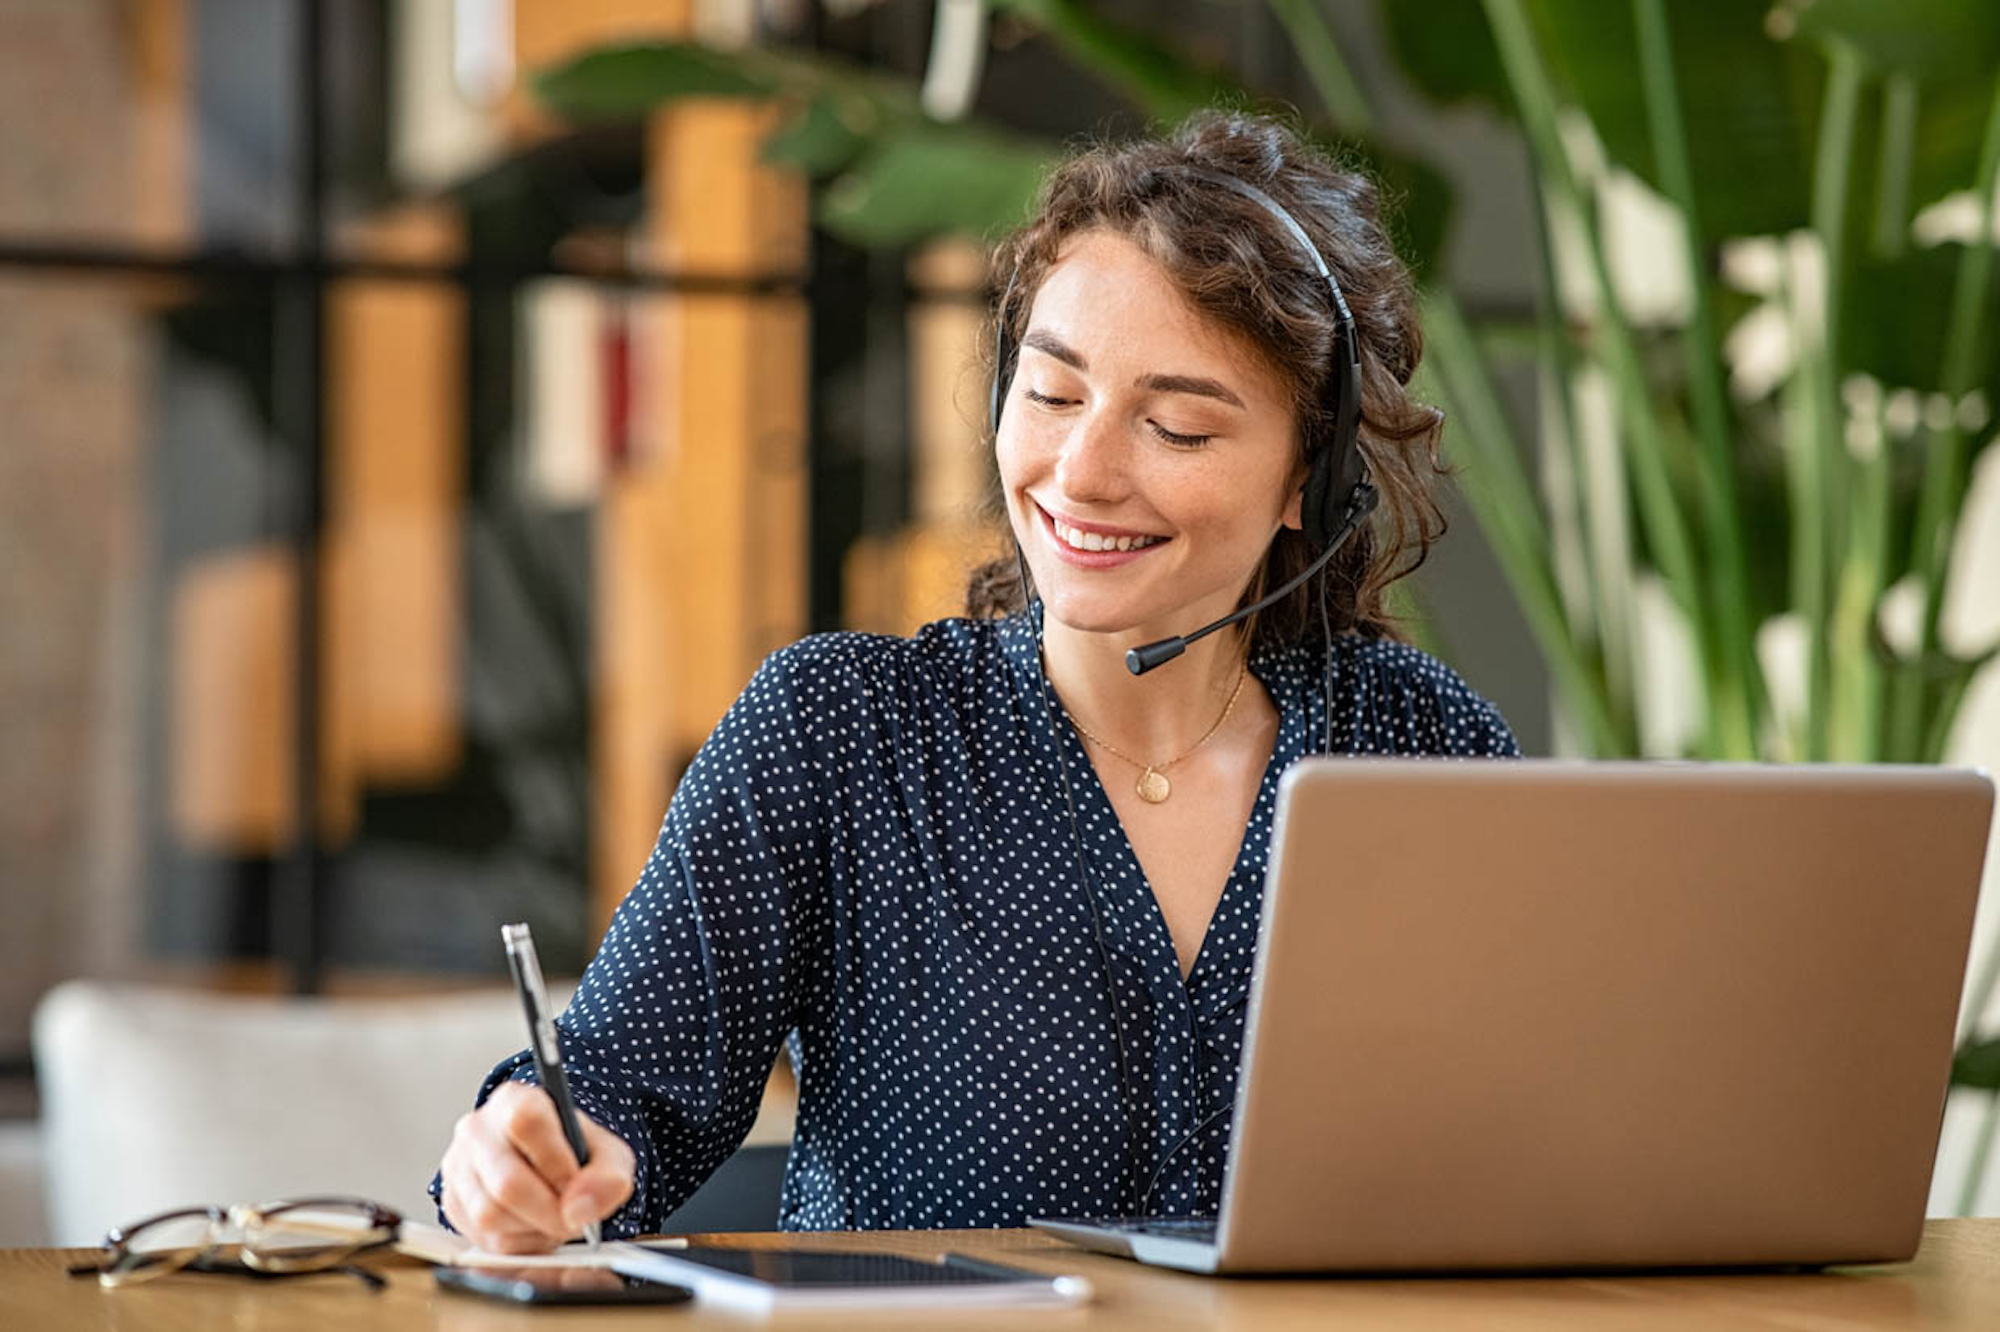 Customer service agent with headset and notepad